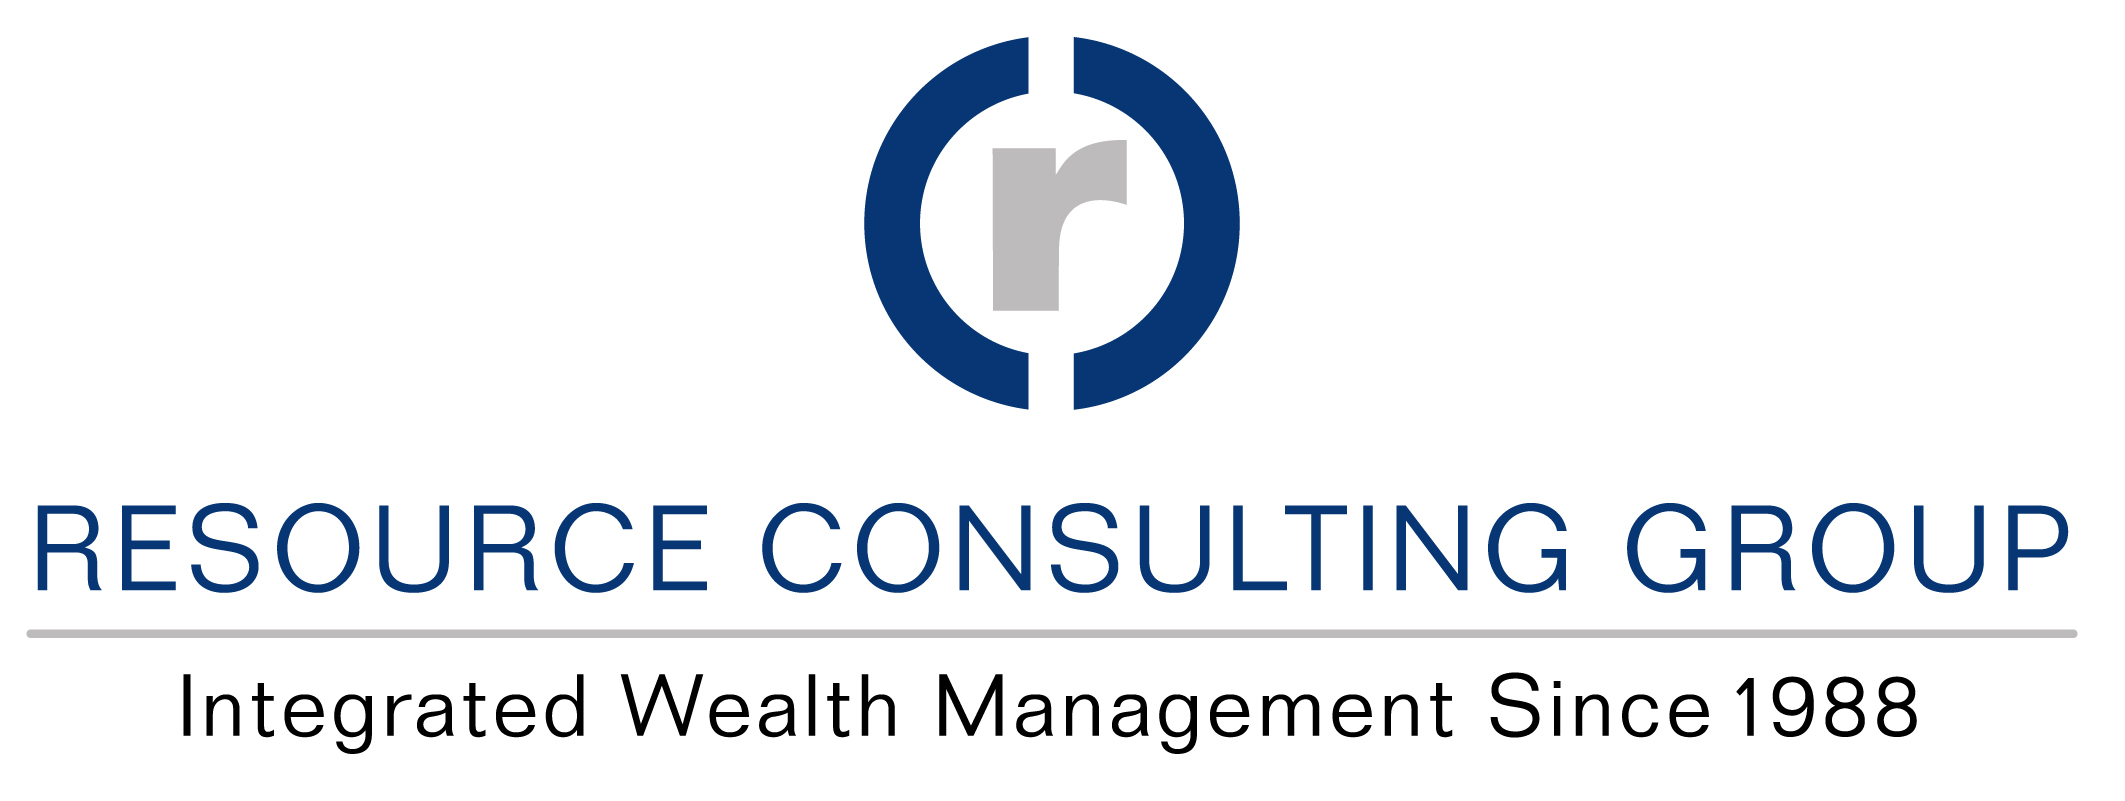 Resource Consulting Group Company Logo